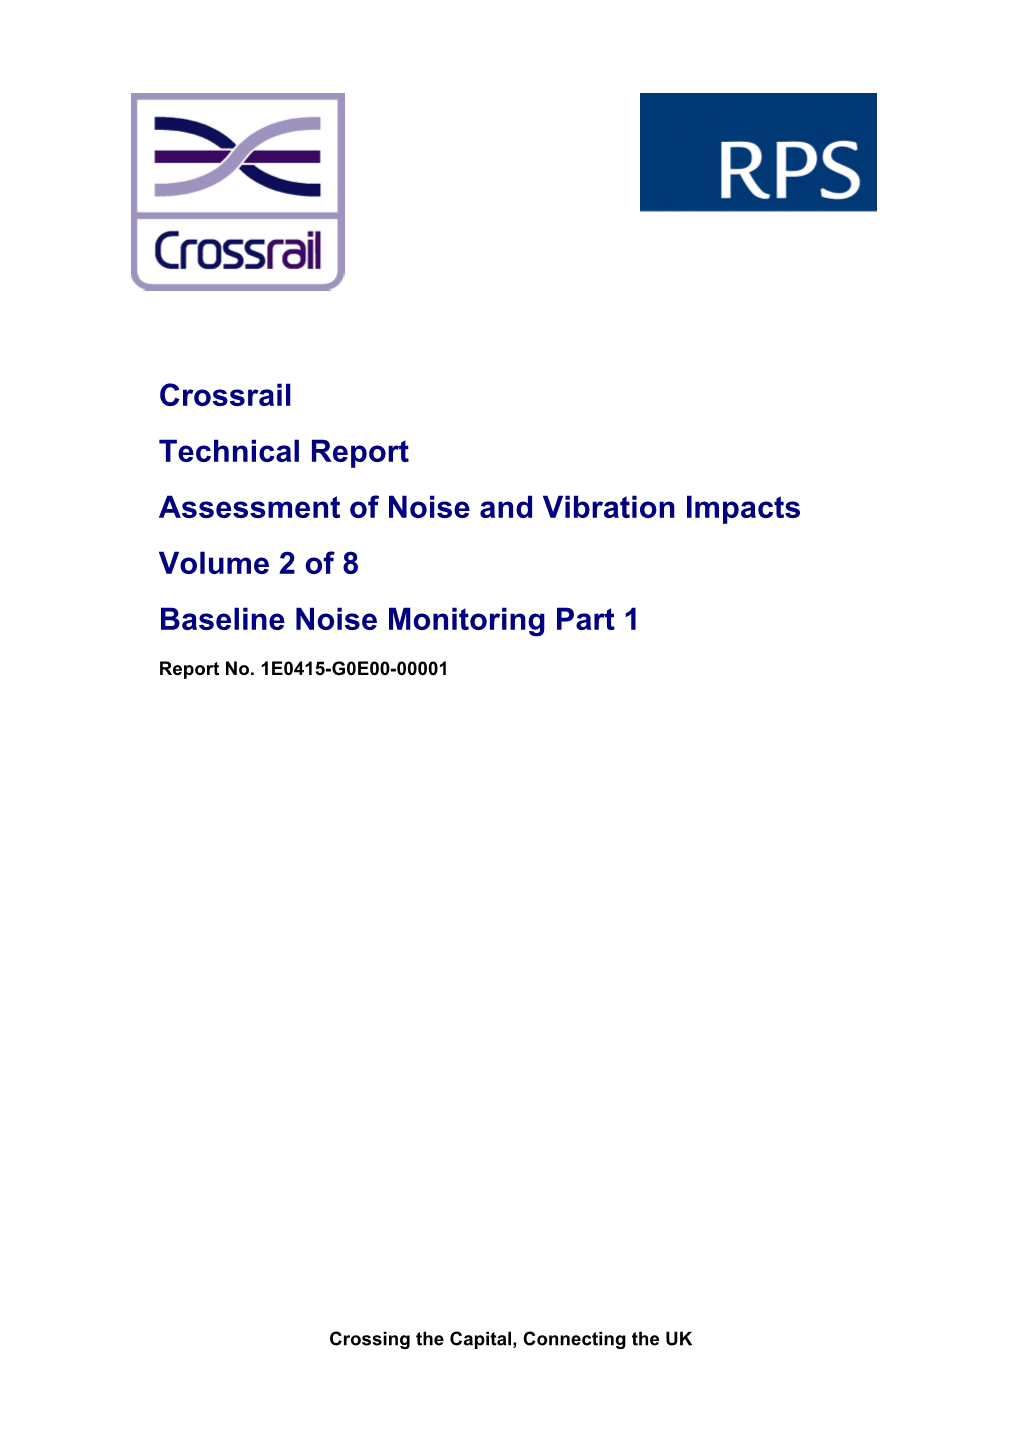 Crossrail Technical Report Assessment of Noise and Vibration Impacts Volume 2 of 8 Baseline Noise Monitoring Part 1